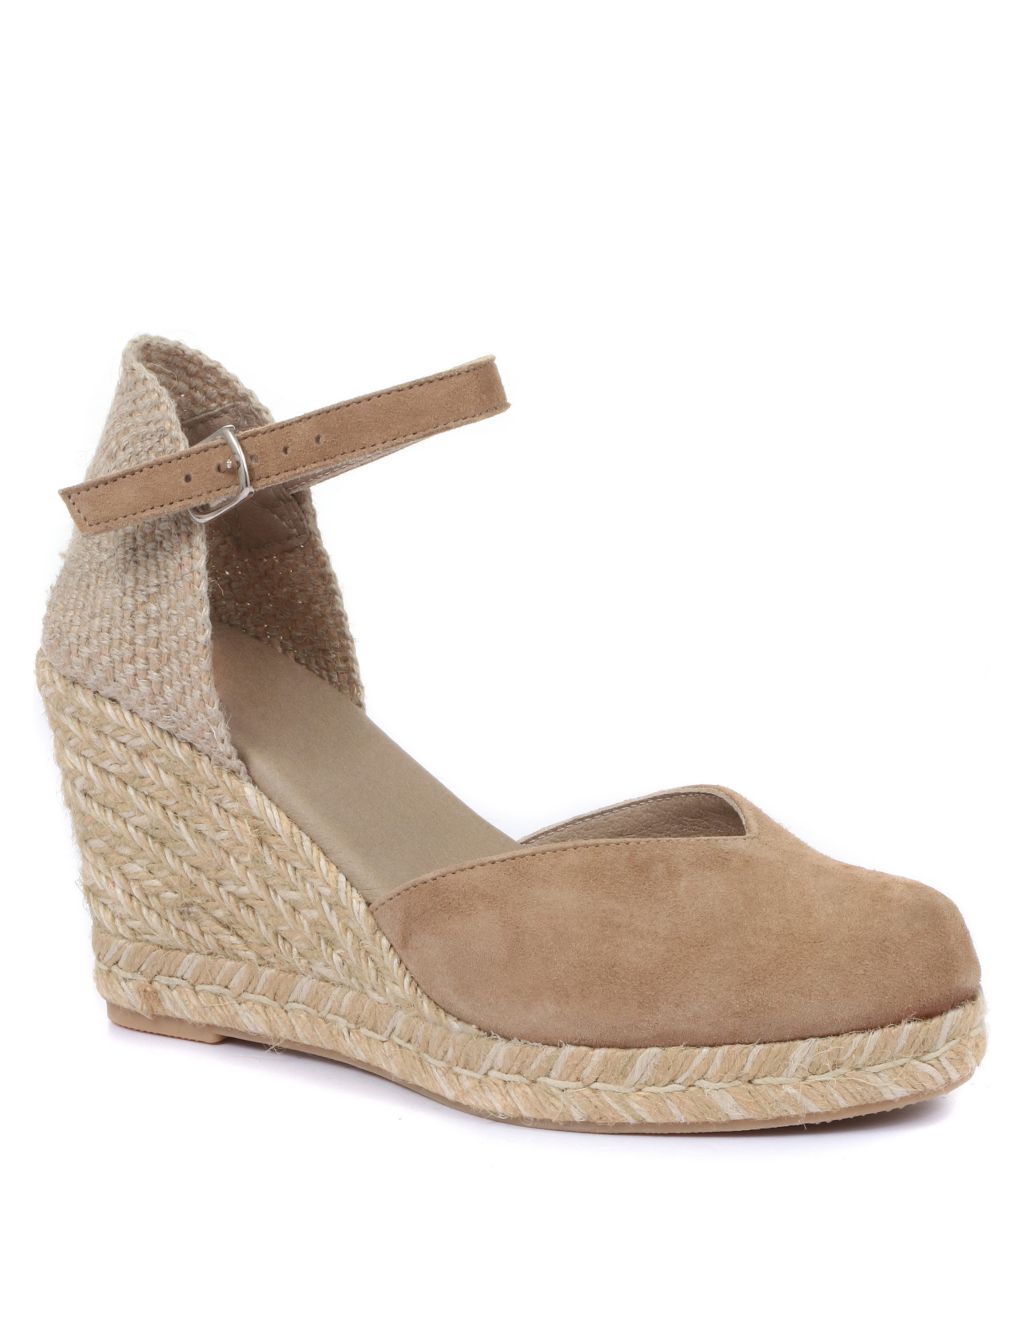 Suede Ankle Strap Wedge Espadrilles image 2